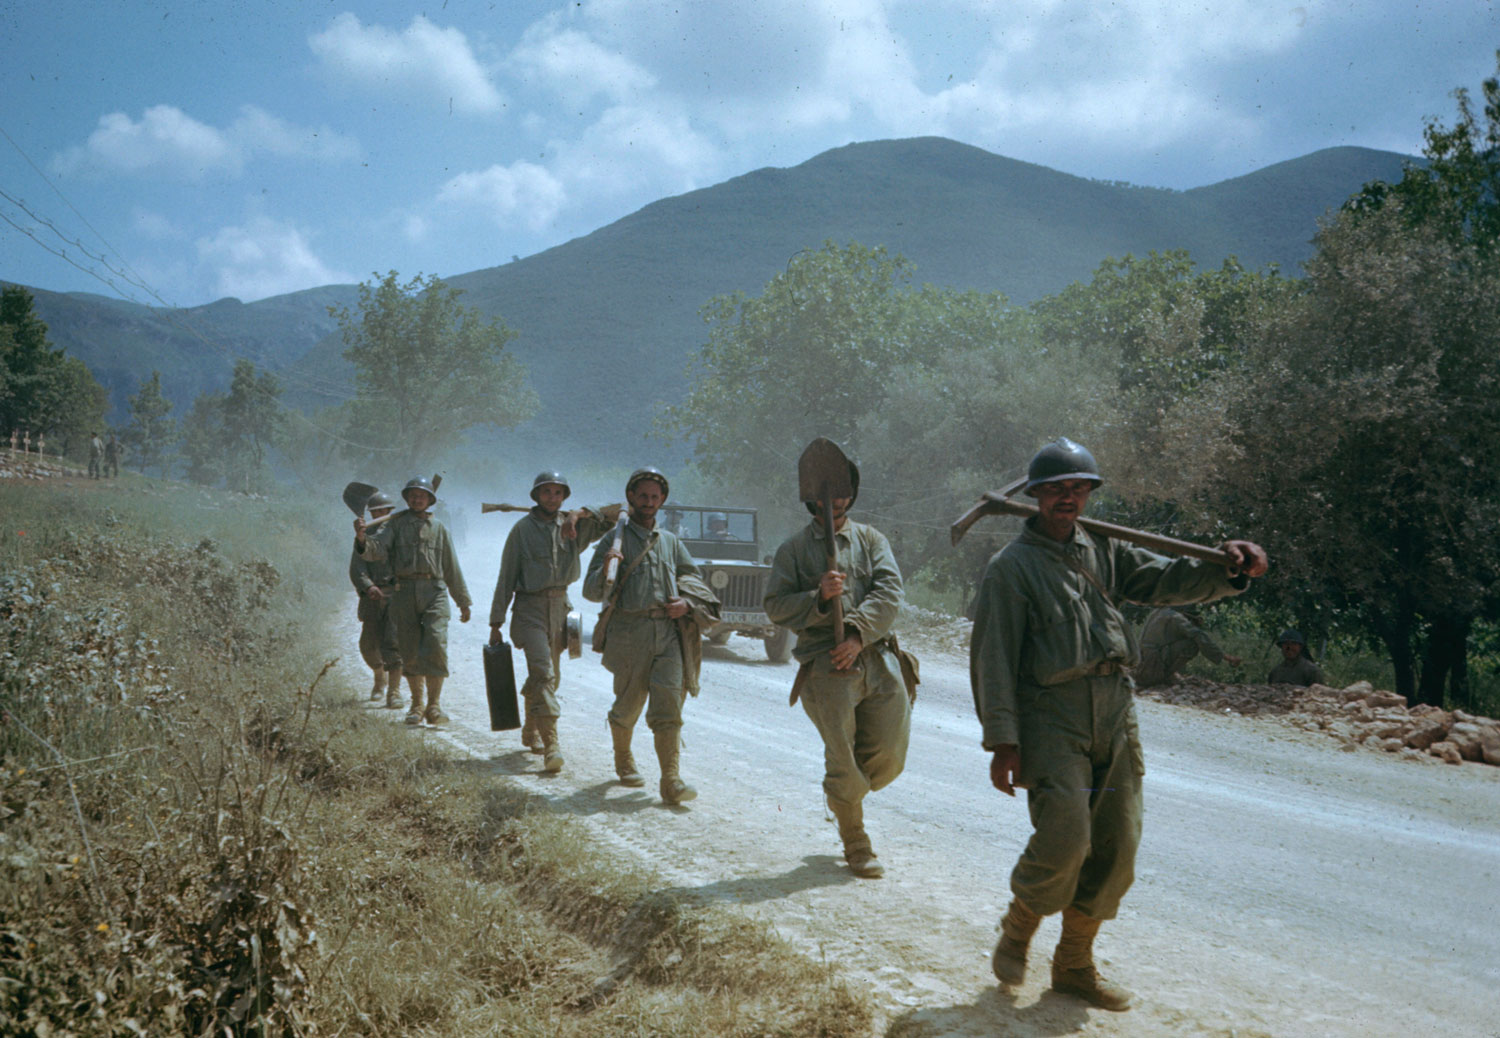 Troops in the Liri Valley, on the road to Rome, Italian Campaign, 1944.